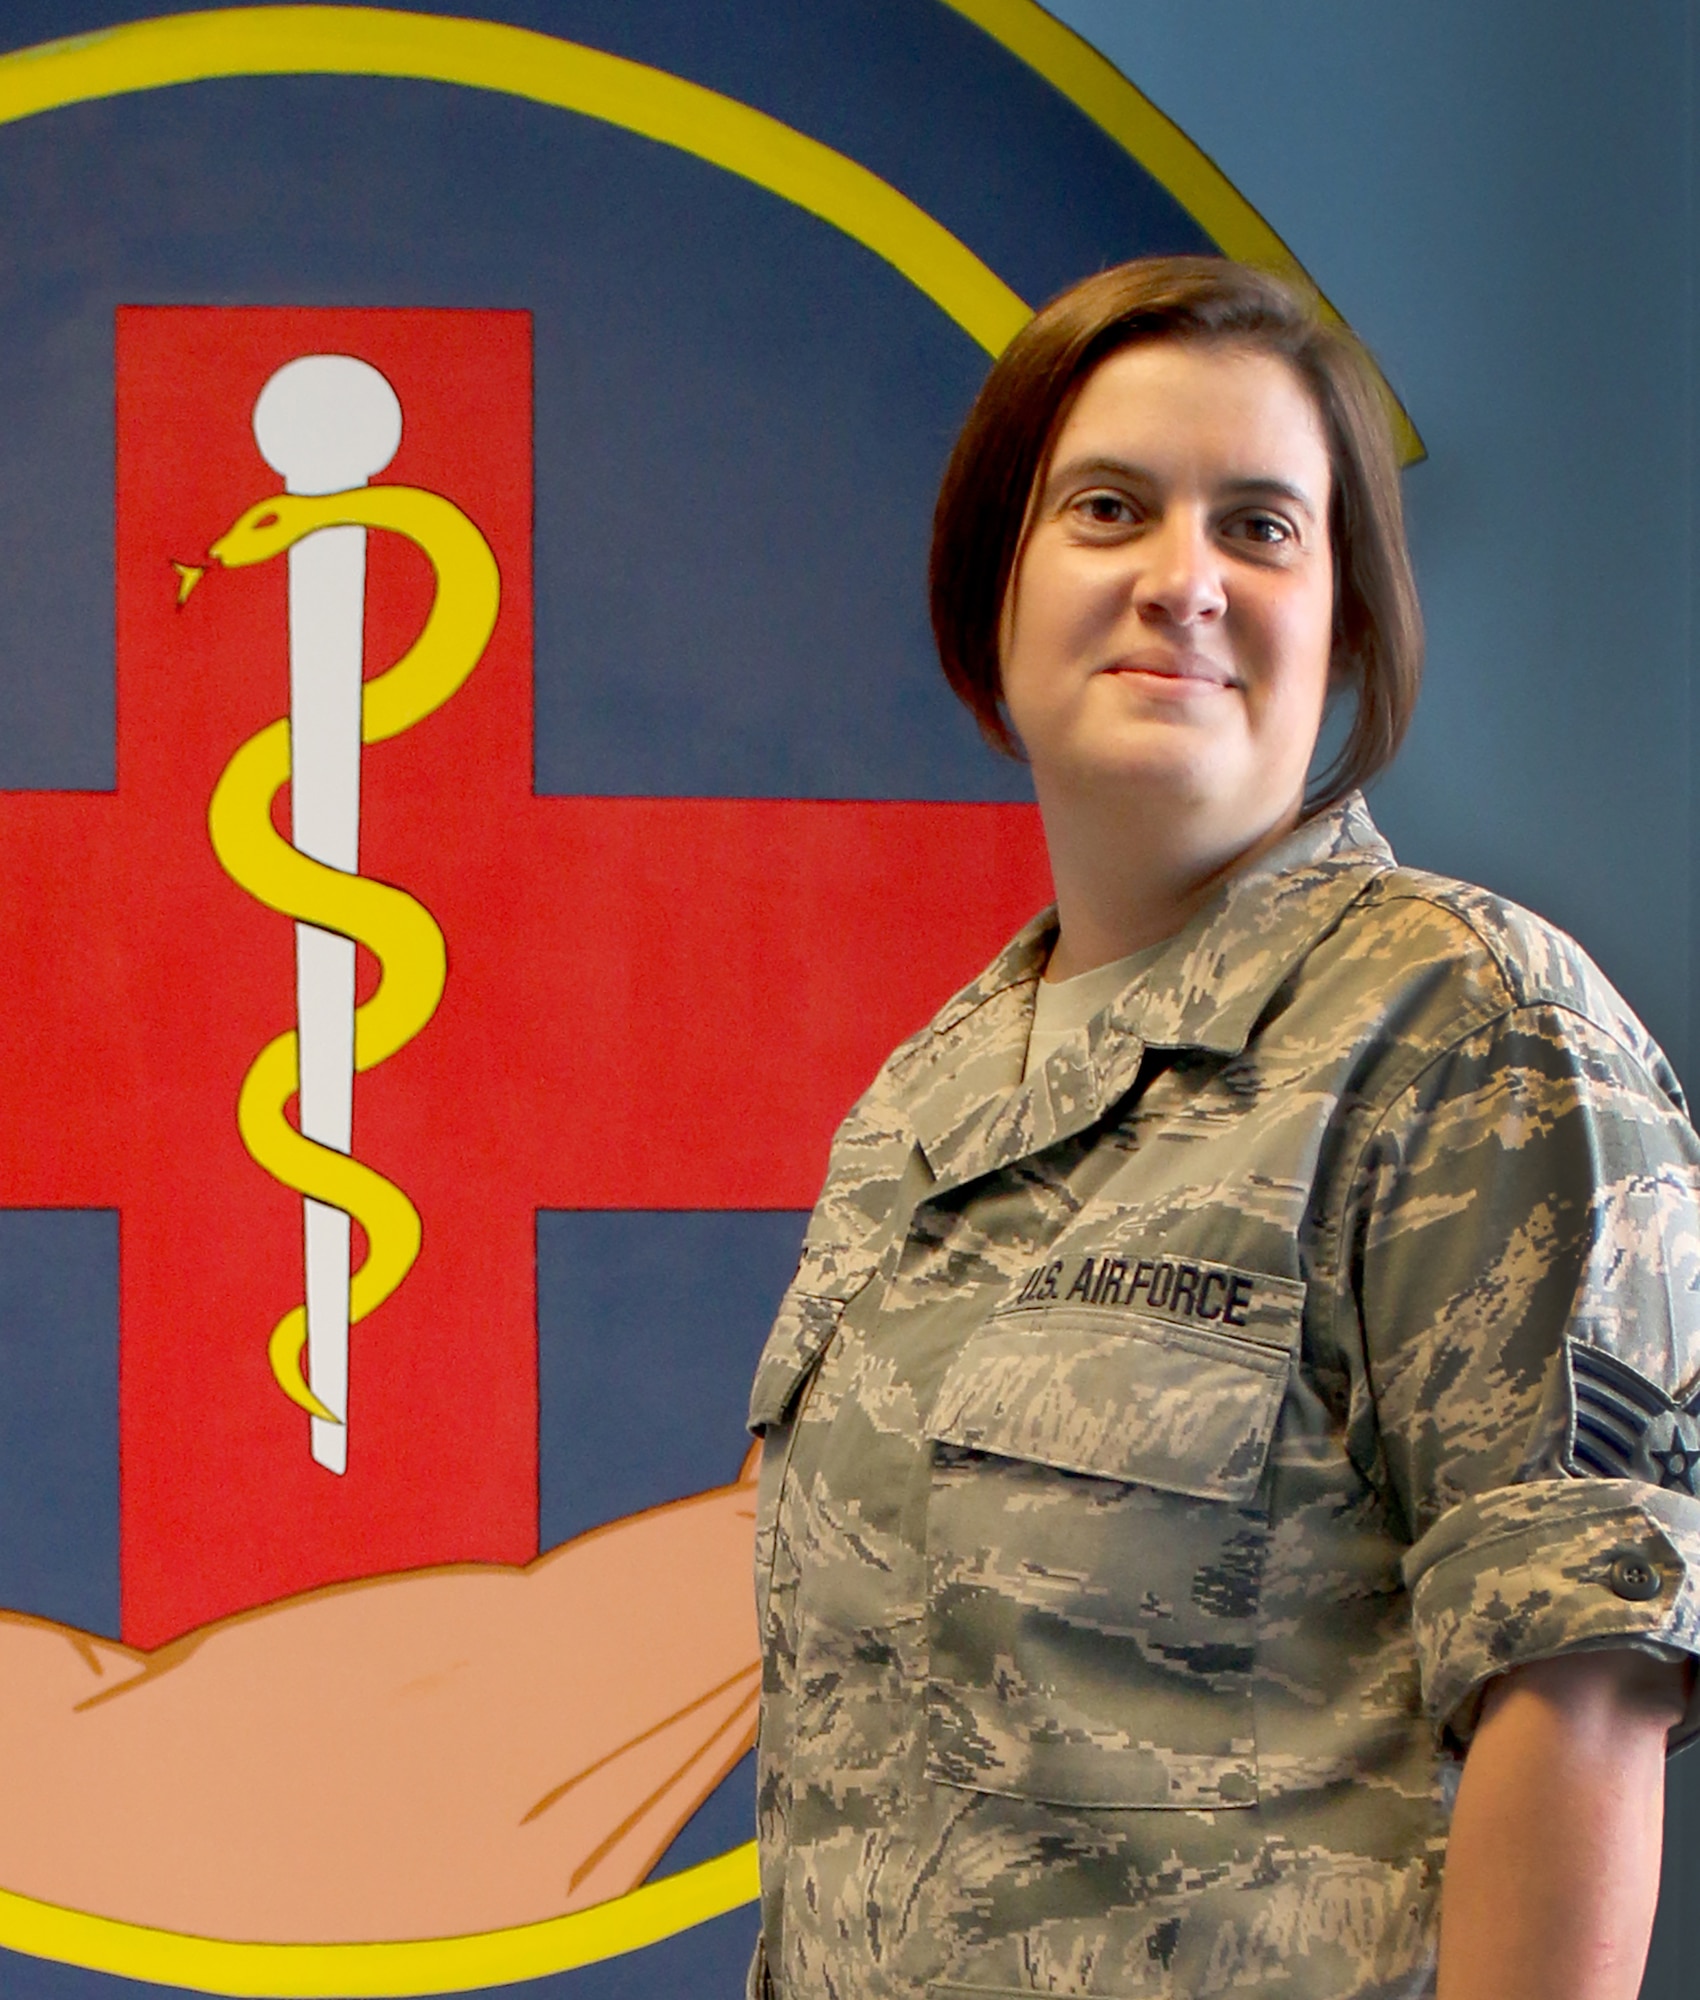 WRIGHT-PATTERSON AIR FORCE BASE, Ohio – Staff Sgt. Julia Rang, 445th Aerospace Medicine Squadron health service management journeyman, is the 445th Airlift Wing November Spotlight Performer. (U.S. Air Force photo/Tech. Sgt. Patrick O’Reilly)